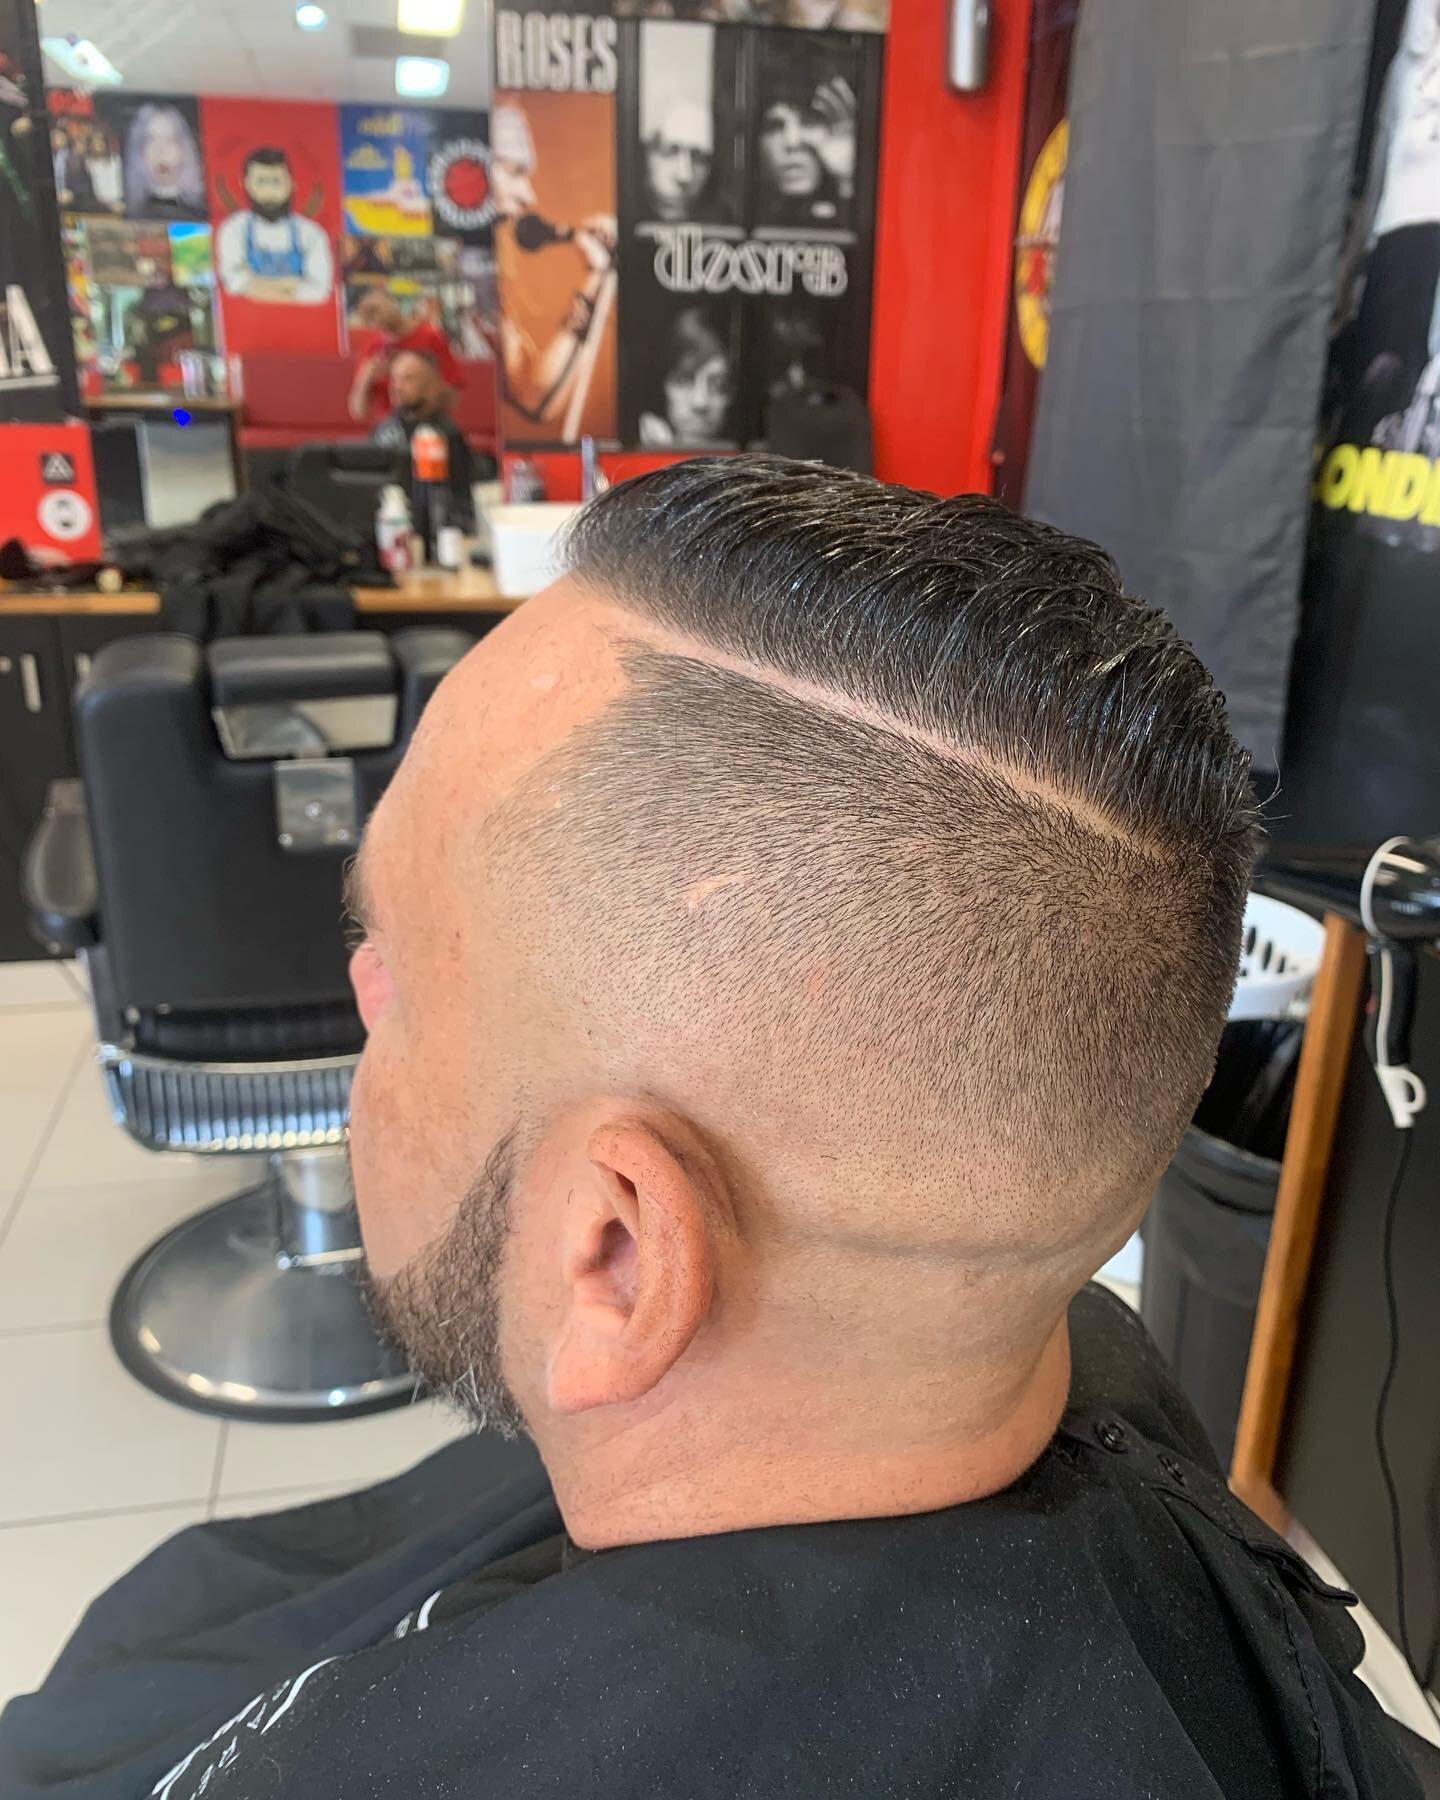 Simple but clean! Quality comes in many forms. So book in now! Limited spots available 🔥 

#refugebarber #refugeclothingrefugecairns #cairnsbarber #cairnsaustrralia #cairns #barbershop #cairnsbarbershop #barbershopconnect #cairnsbusiness #cairnsloca